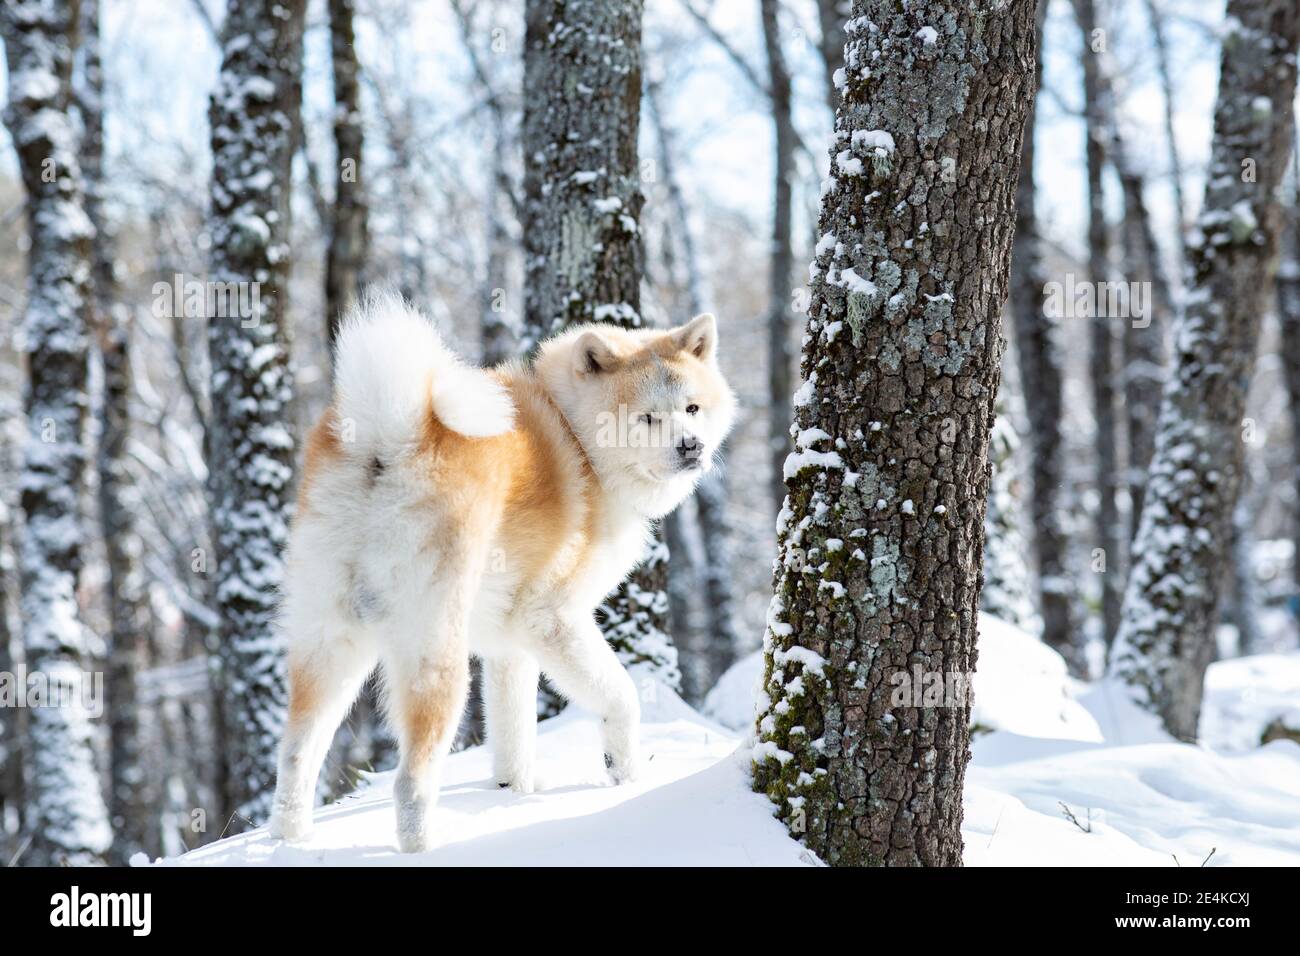 Akita dog walking in forest in snow Stock Photo